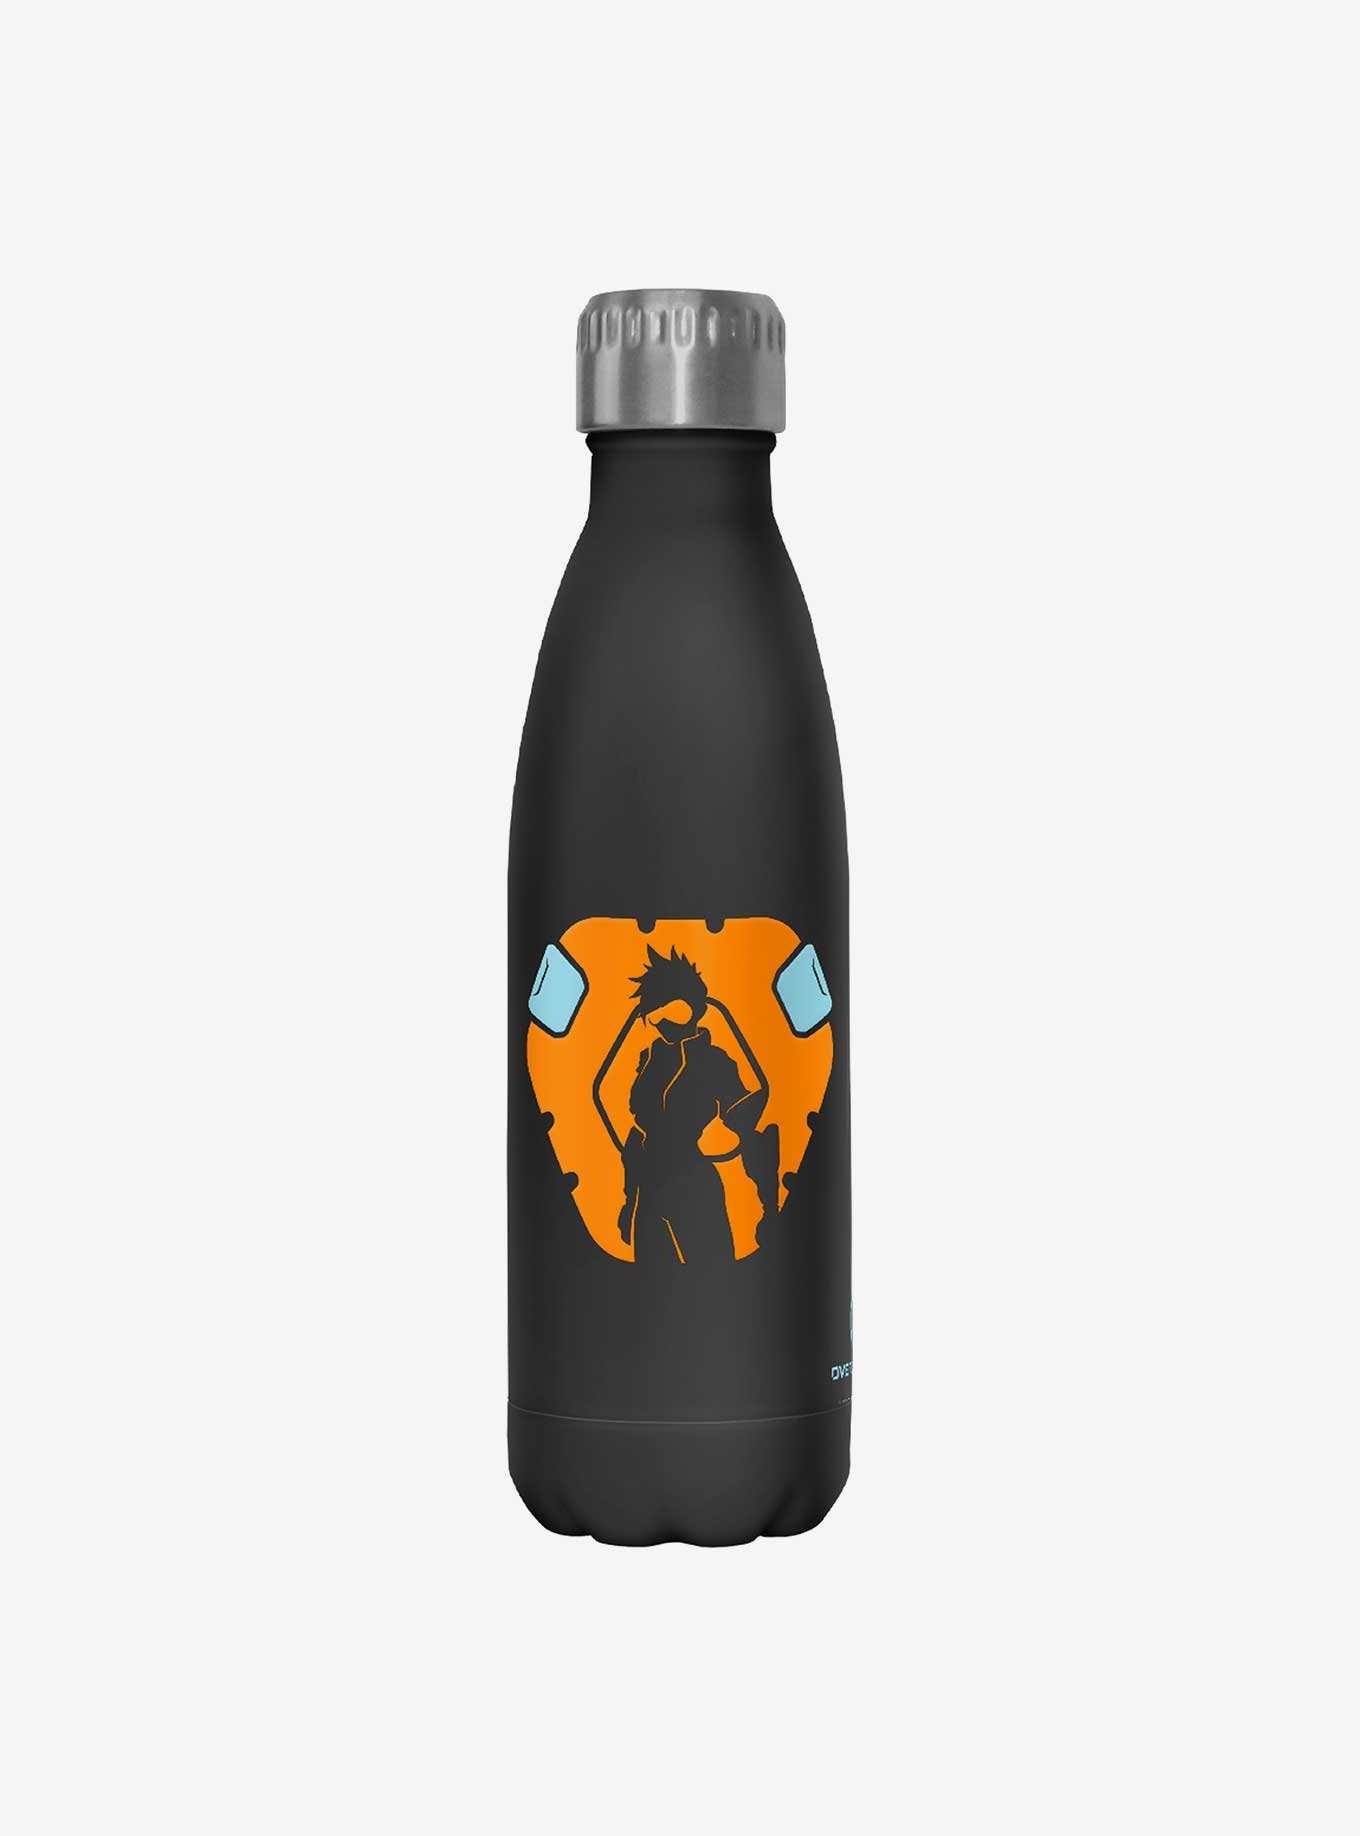 Overwatch Tracer Badge Stainless Steel Water Bottle, , hi-res